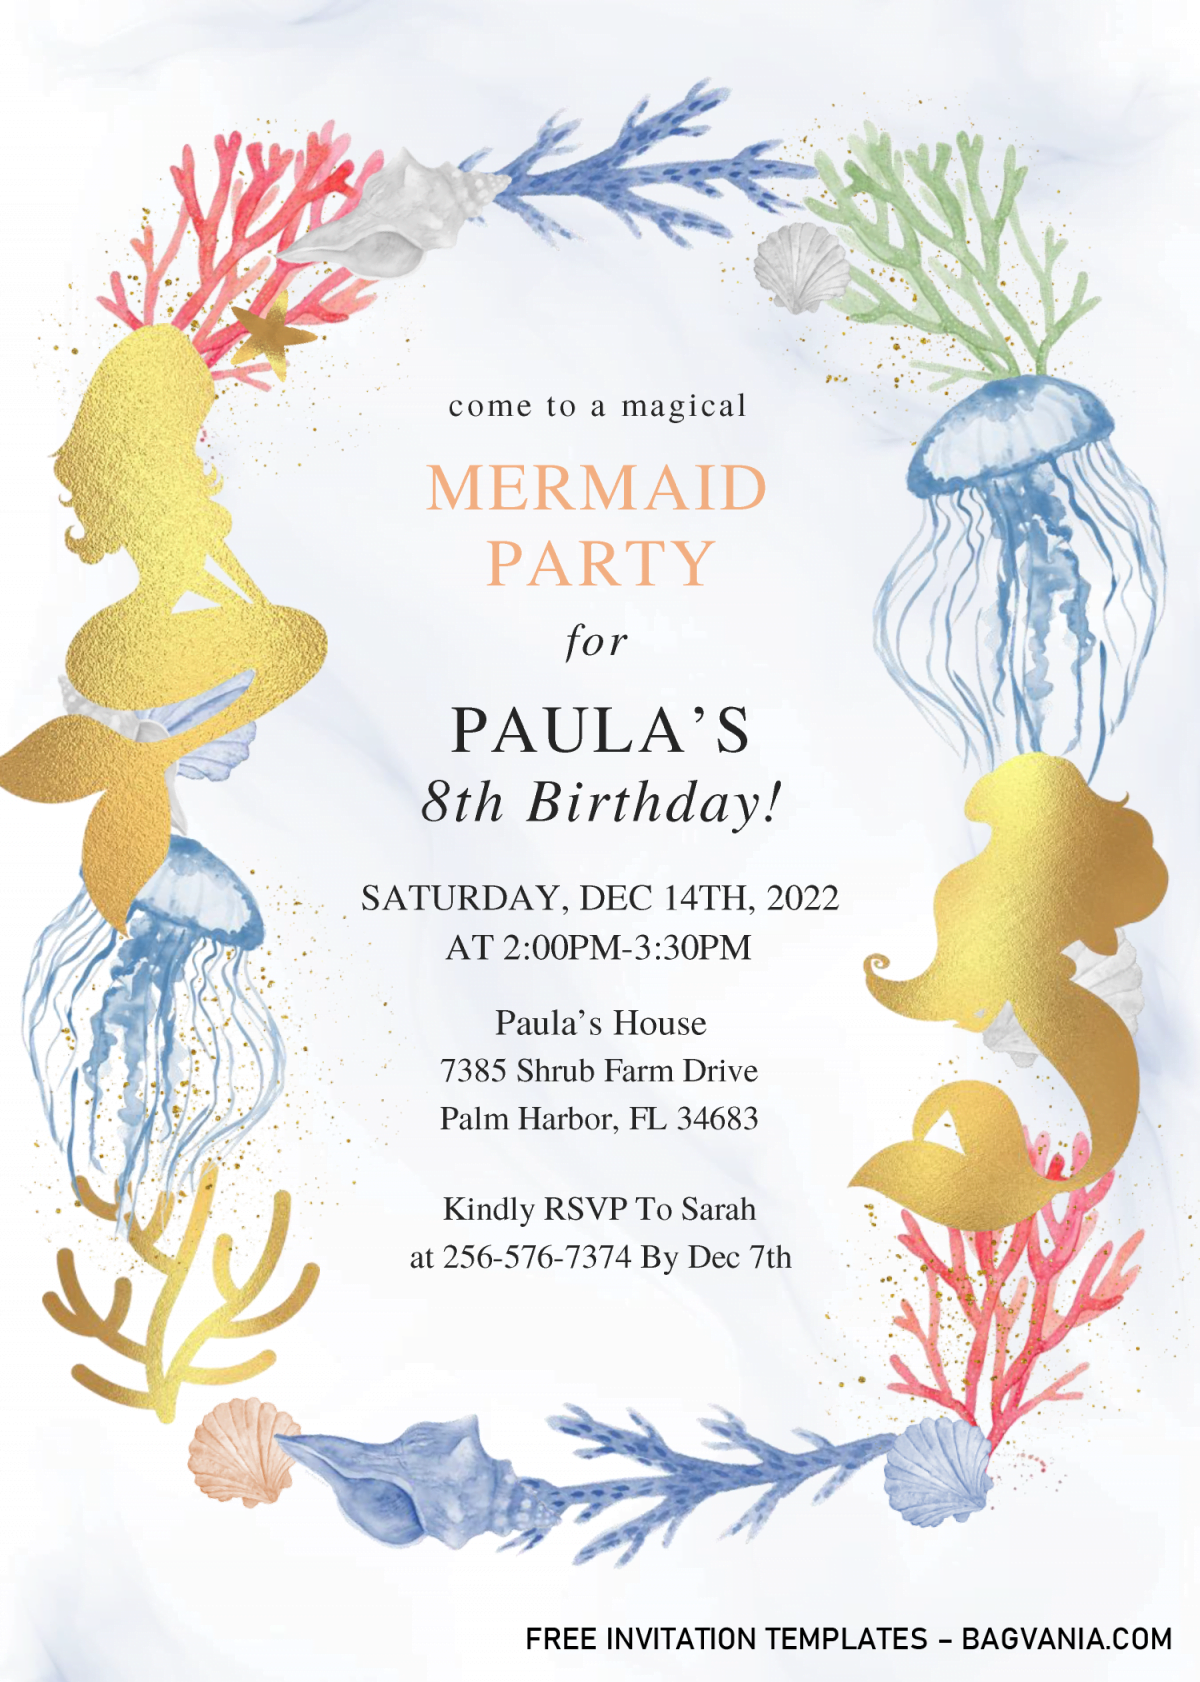 Mermaid Party Invitation Templates - Editable With Microsoft Word and has gold mermaid silhouette